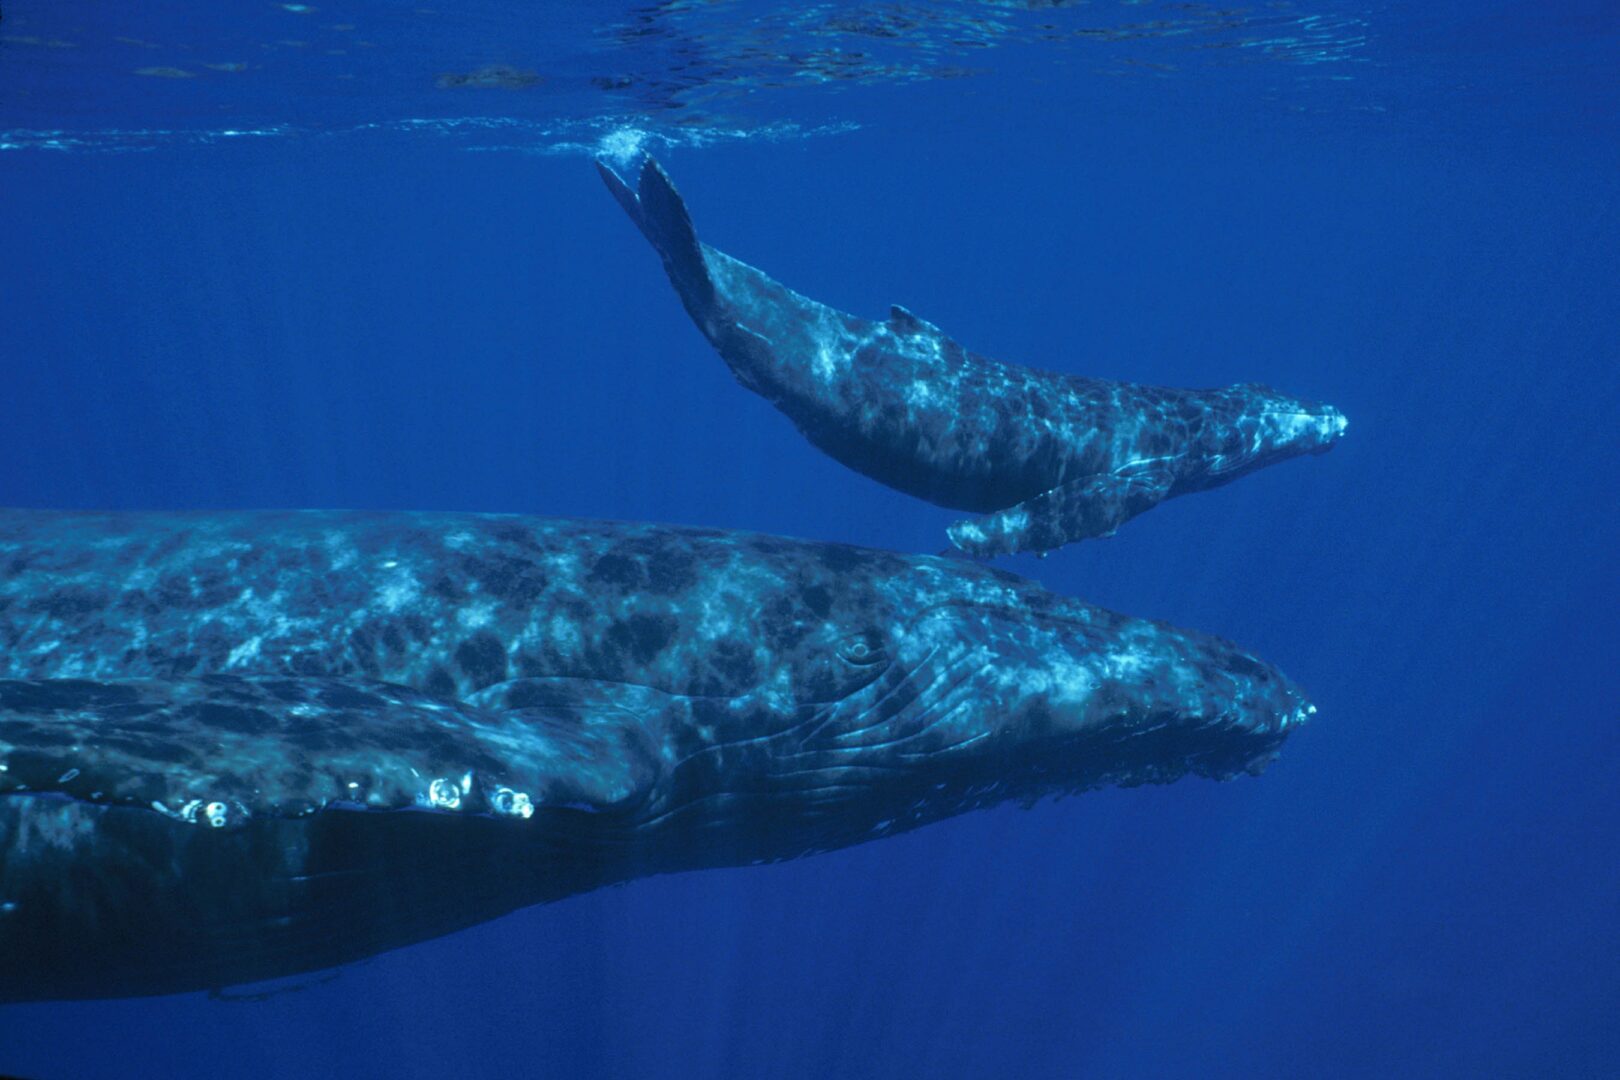 Two whales swimming in the ocean under a blue sky.